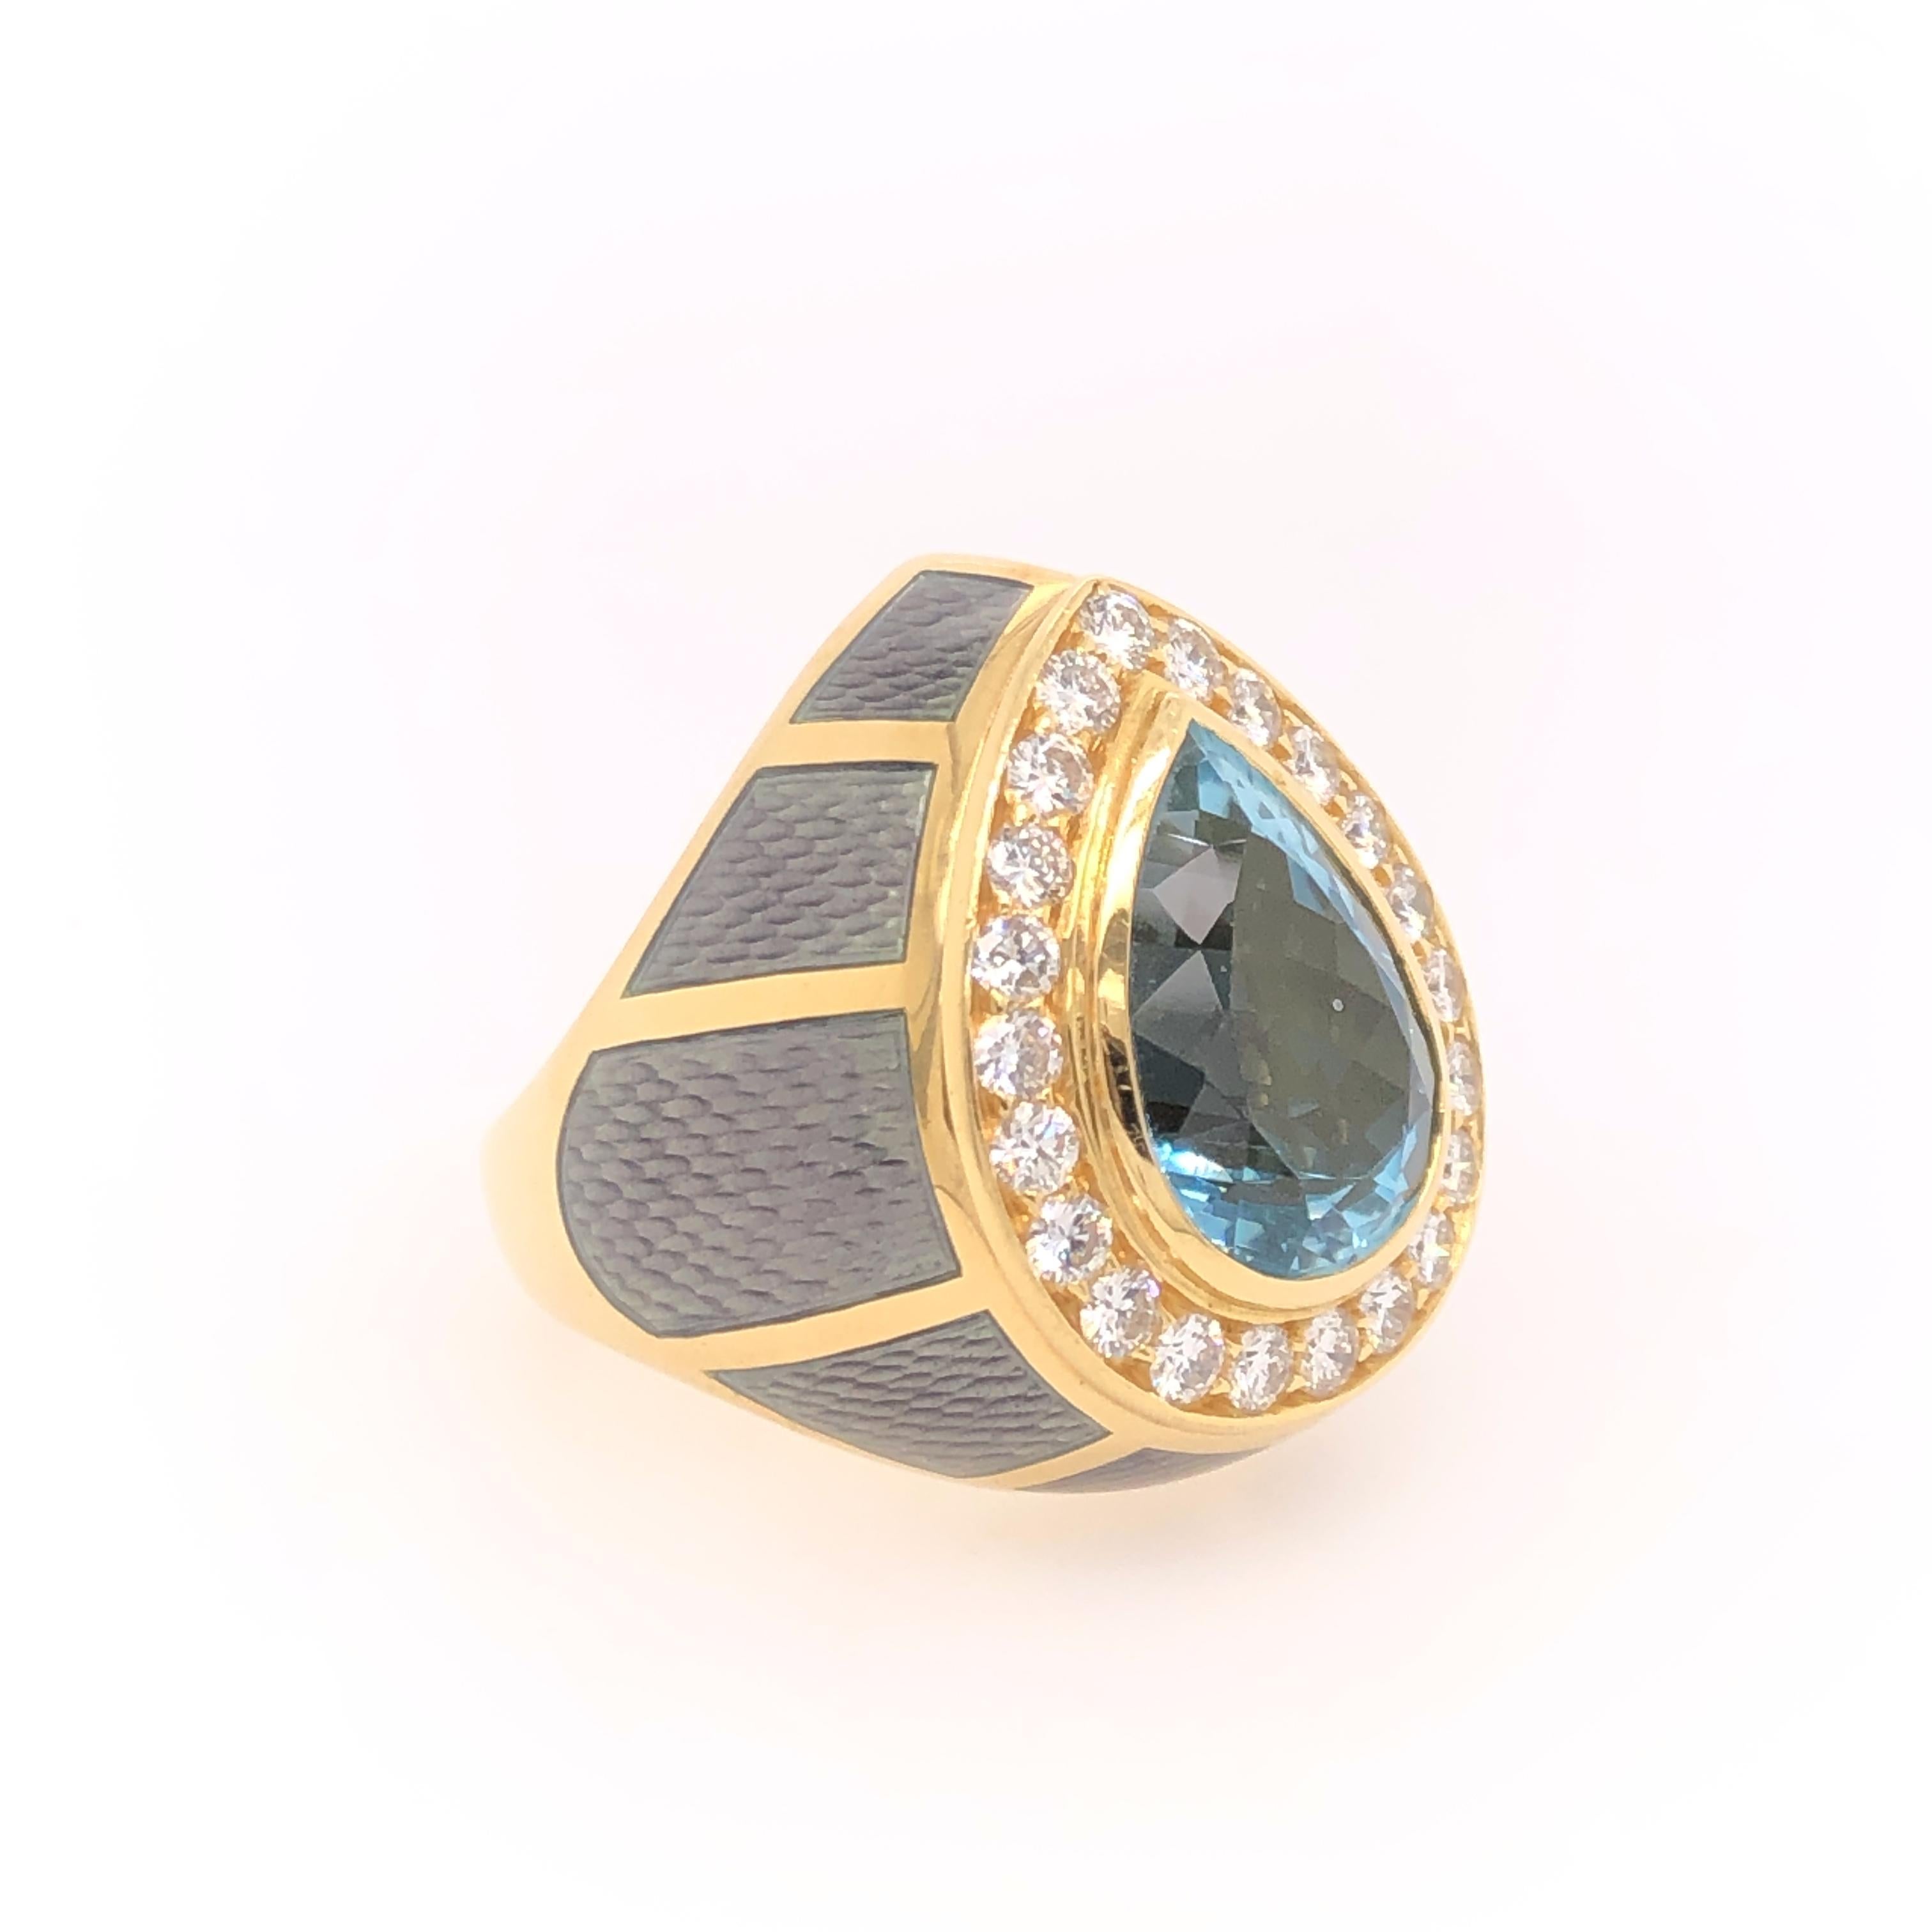 If you are wanting a statement piece, look no further. This 18K yellow gold, aquamarine, diamond, and enamel ring with its substantial designed brilliant sparkle is a sure conversation starter. 

Size: 7.5

Stamped: LDV, 750